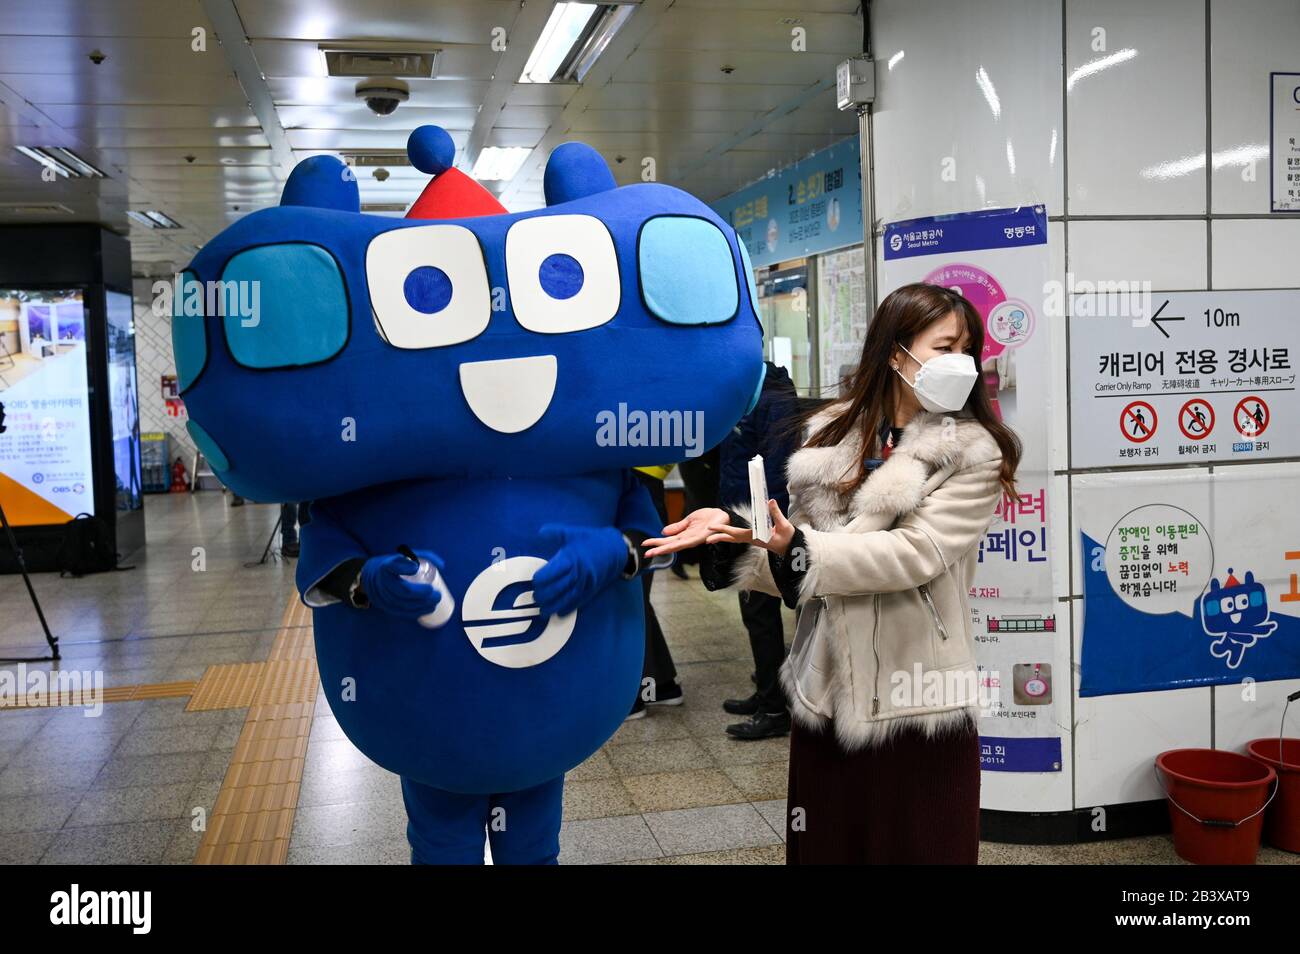 Seoul, South Korea. 05th Mar, 2020. The Seoul subway mascot, Ddota, promotes the use of hand sanitizer in order to protect against the coronavirus outbreak in Seoul, South Korea on March 4, 2020. The South Korean death toll from the virus has reached 35, with a total of 5,766 infections country wide, according to the South Korean Centers for Disease Control and Prevention. Photo by Thomas Maresca/UPI Credit: UPI/Alamy Live News Stock Photo